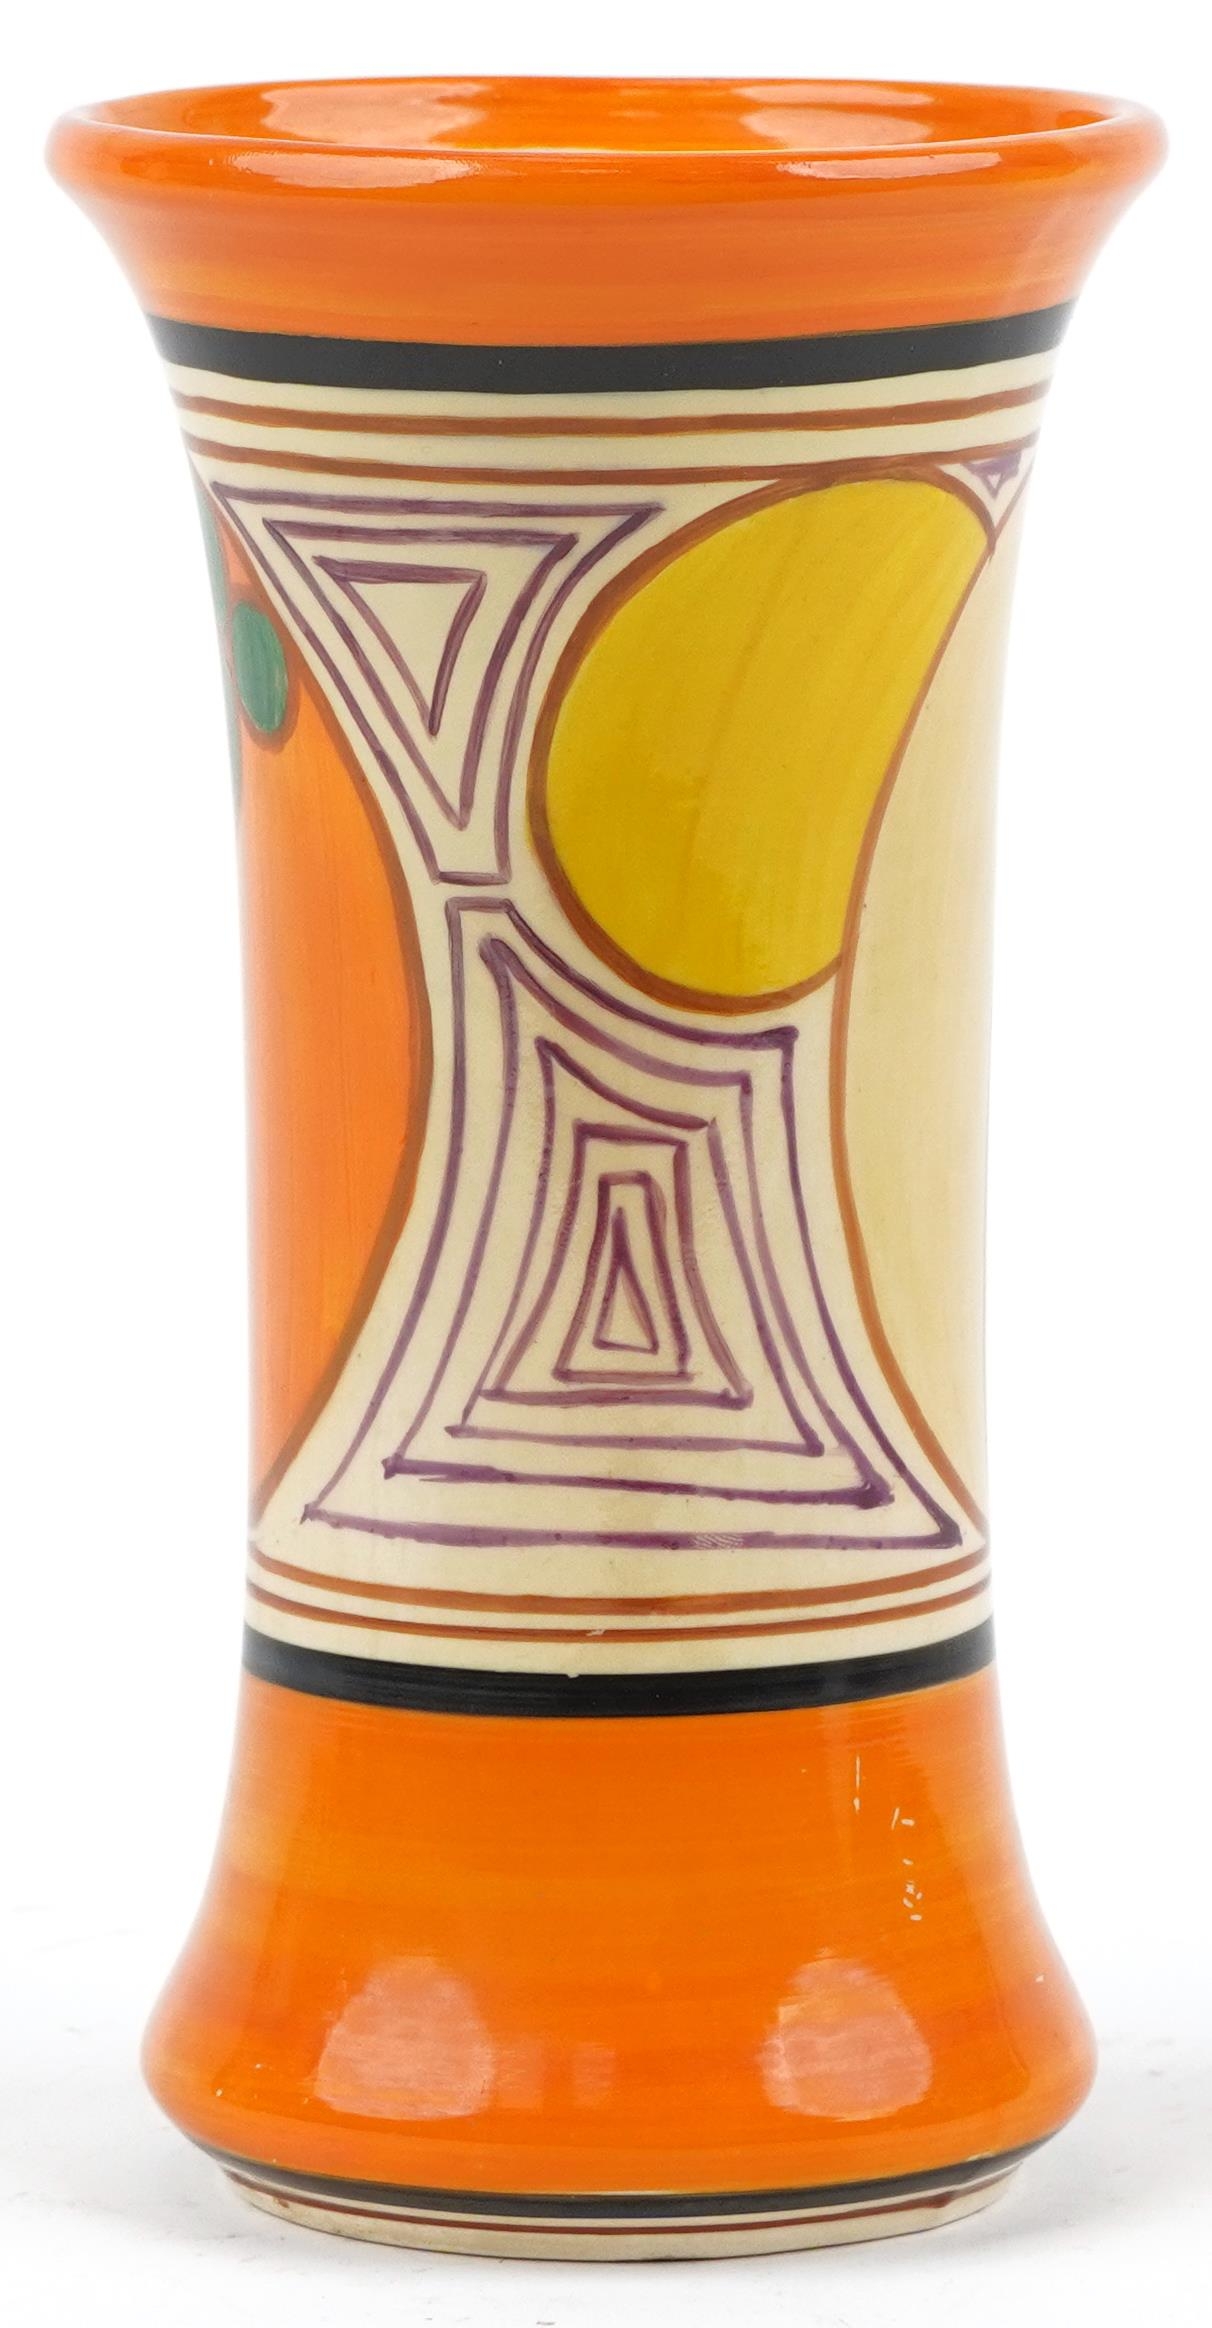 Clarice Cliff, Art Deco Fantastique Bizarre vase hand painted in the melon pattern, numbered 205 - Image 2 of 7